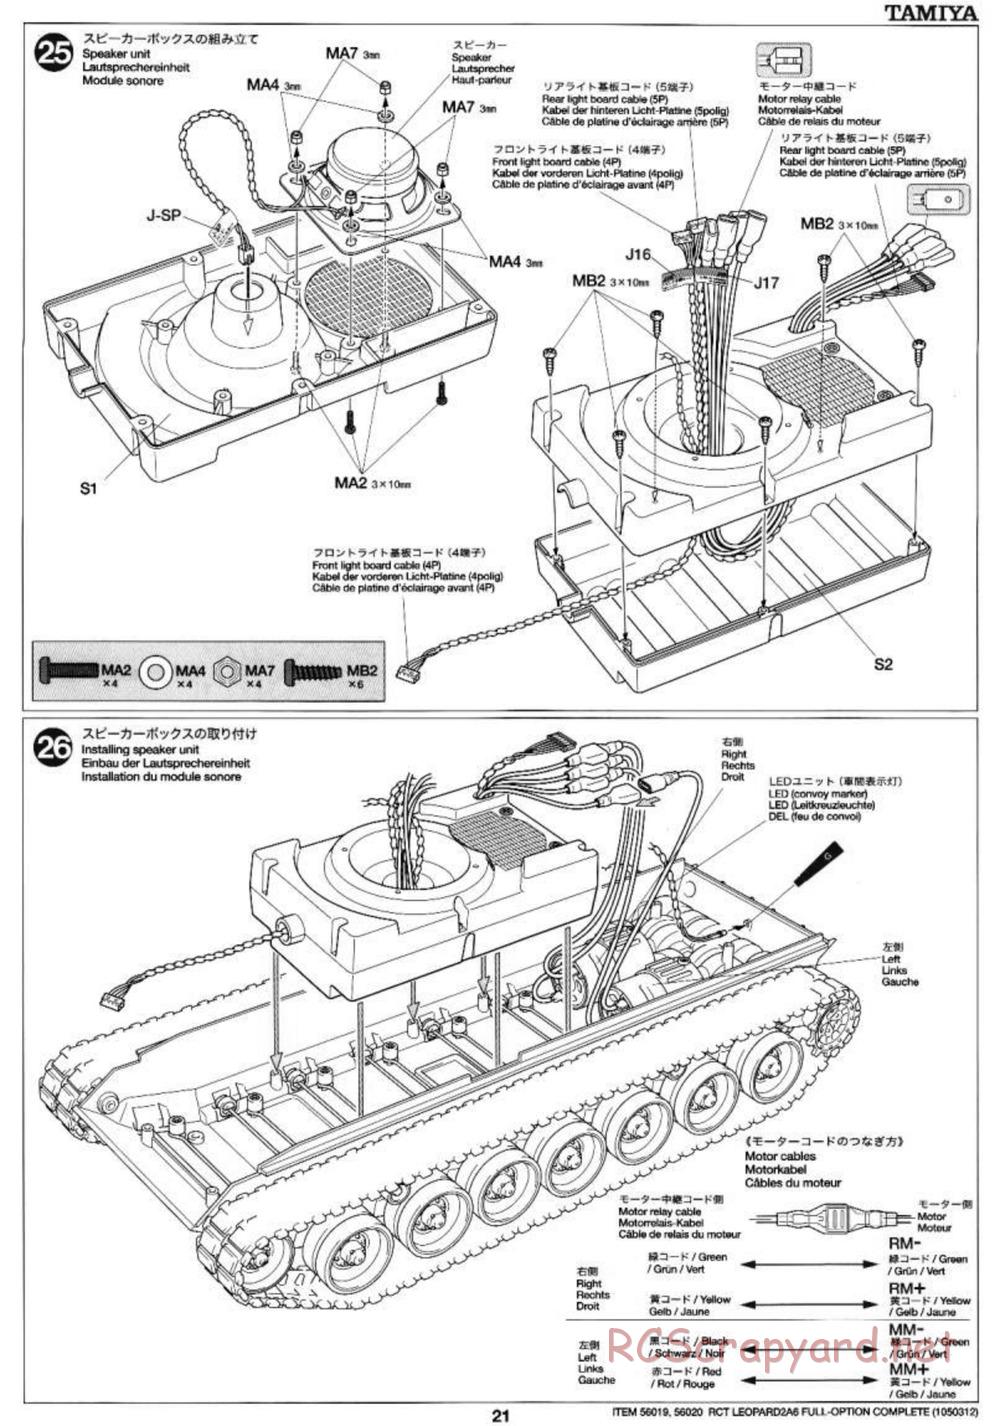 Tamiya - Leopard 2 A6 - 1/16 Scale Chassis - Manual - Page 21